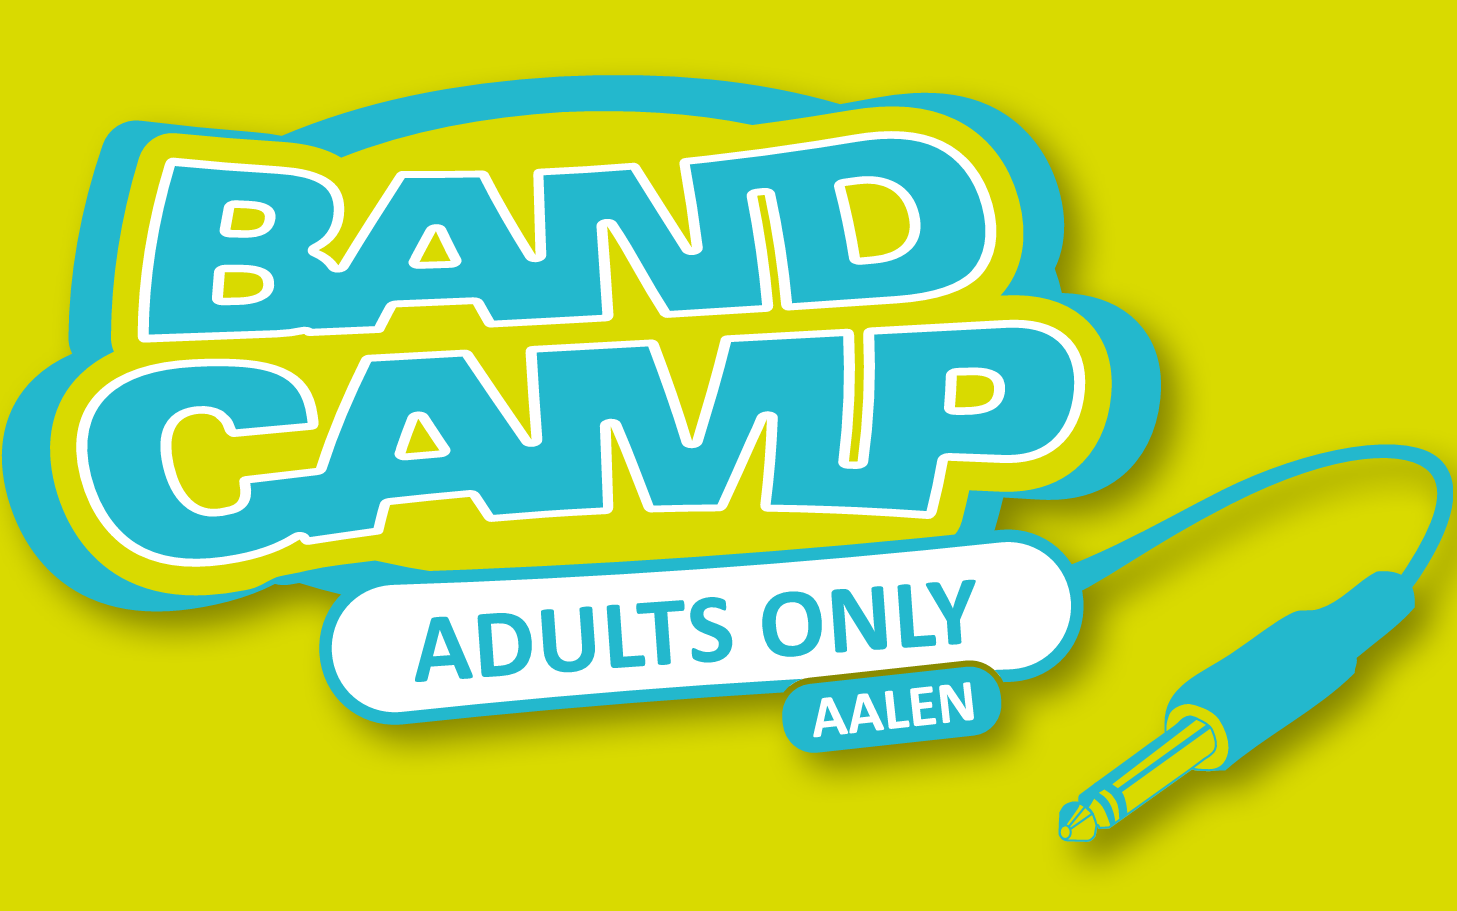 Das Bandcamp – ADULTS ONLY